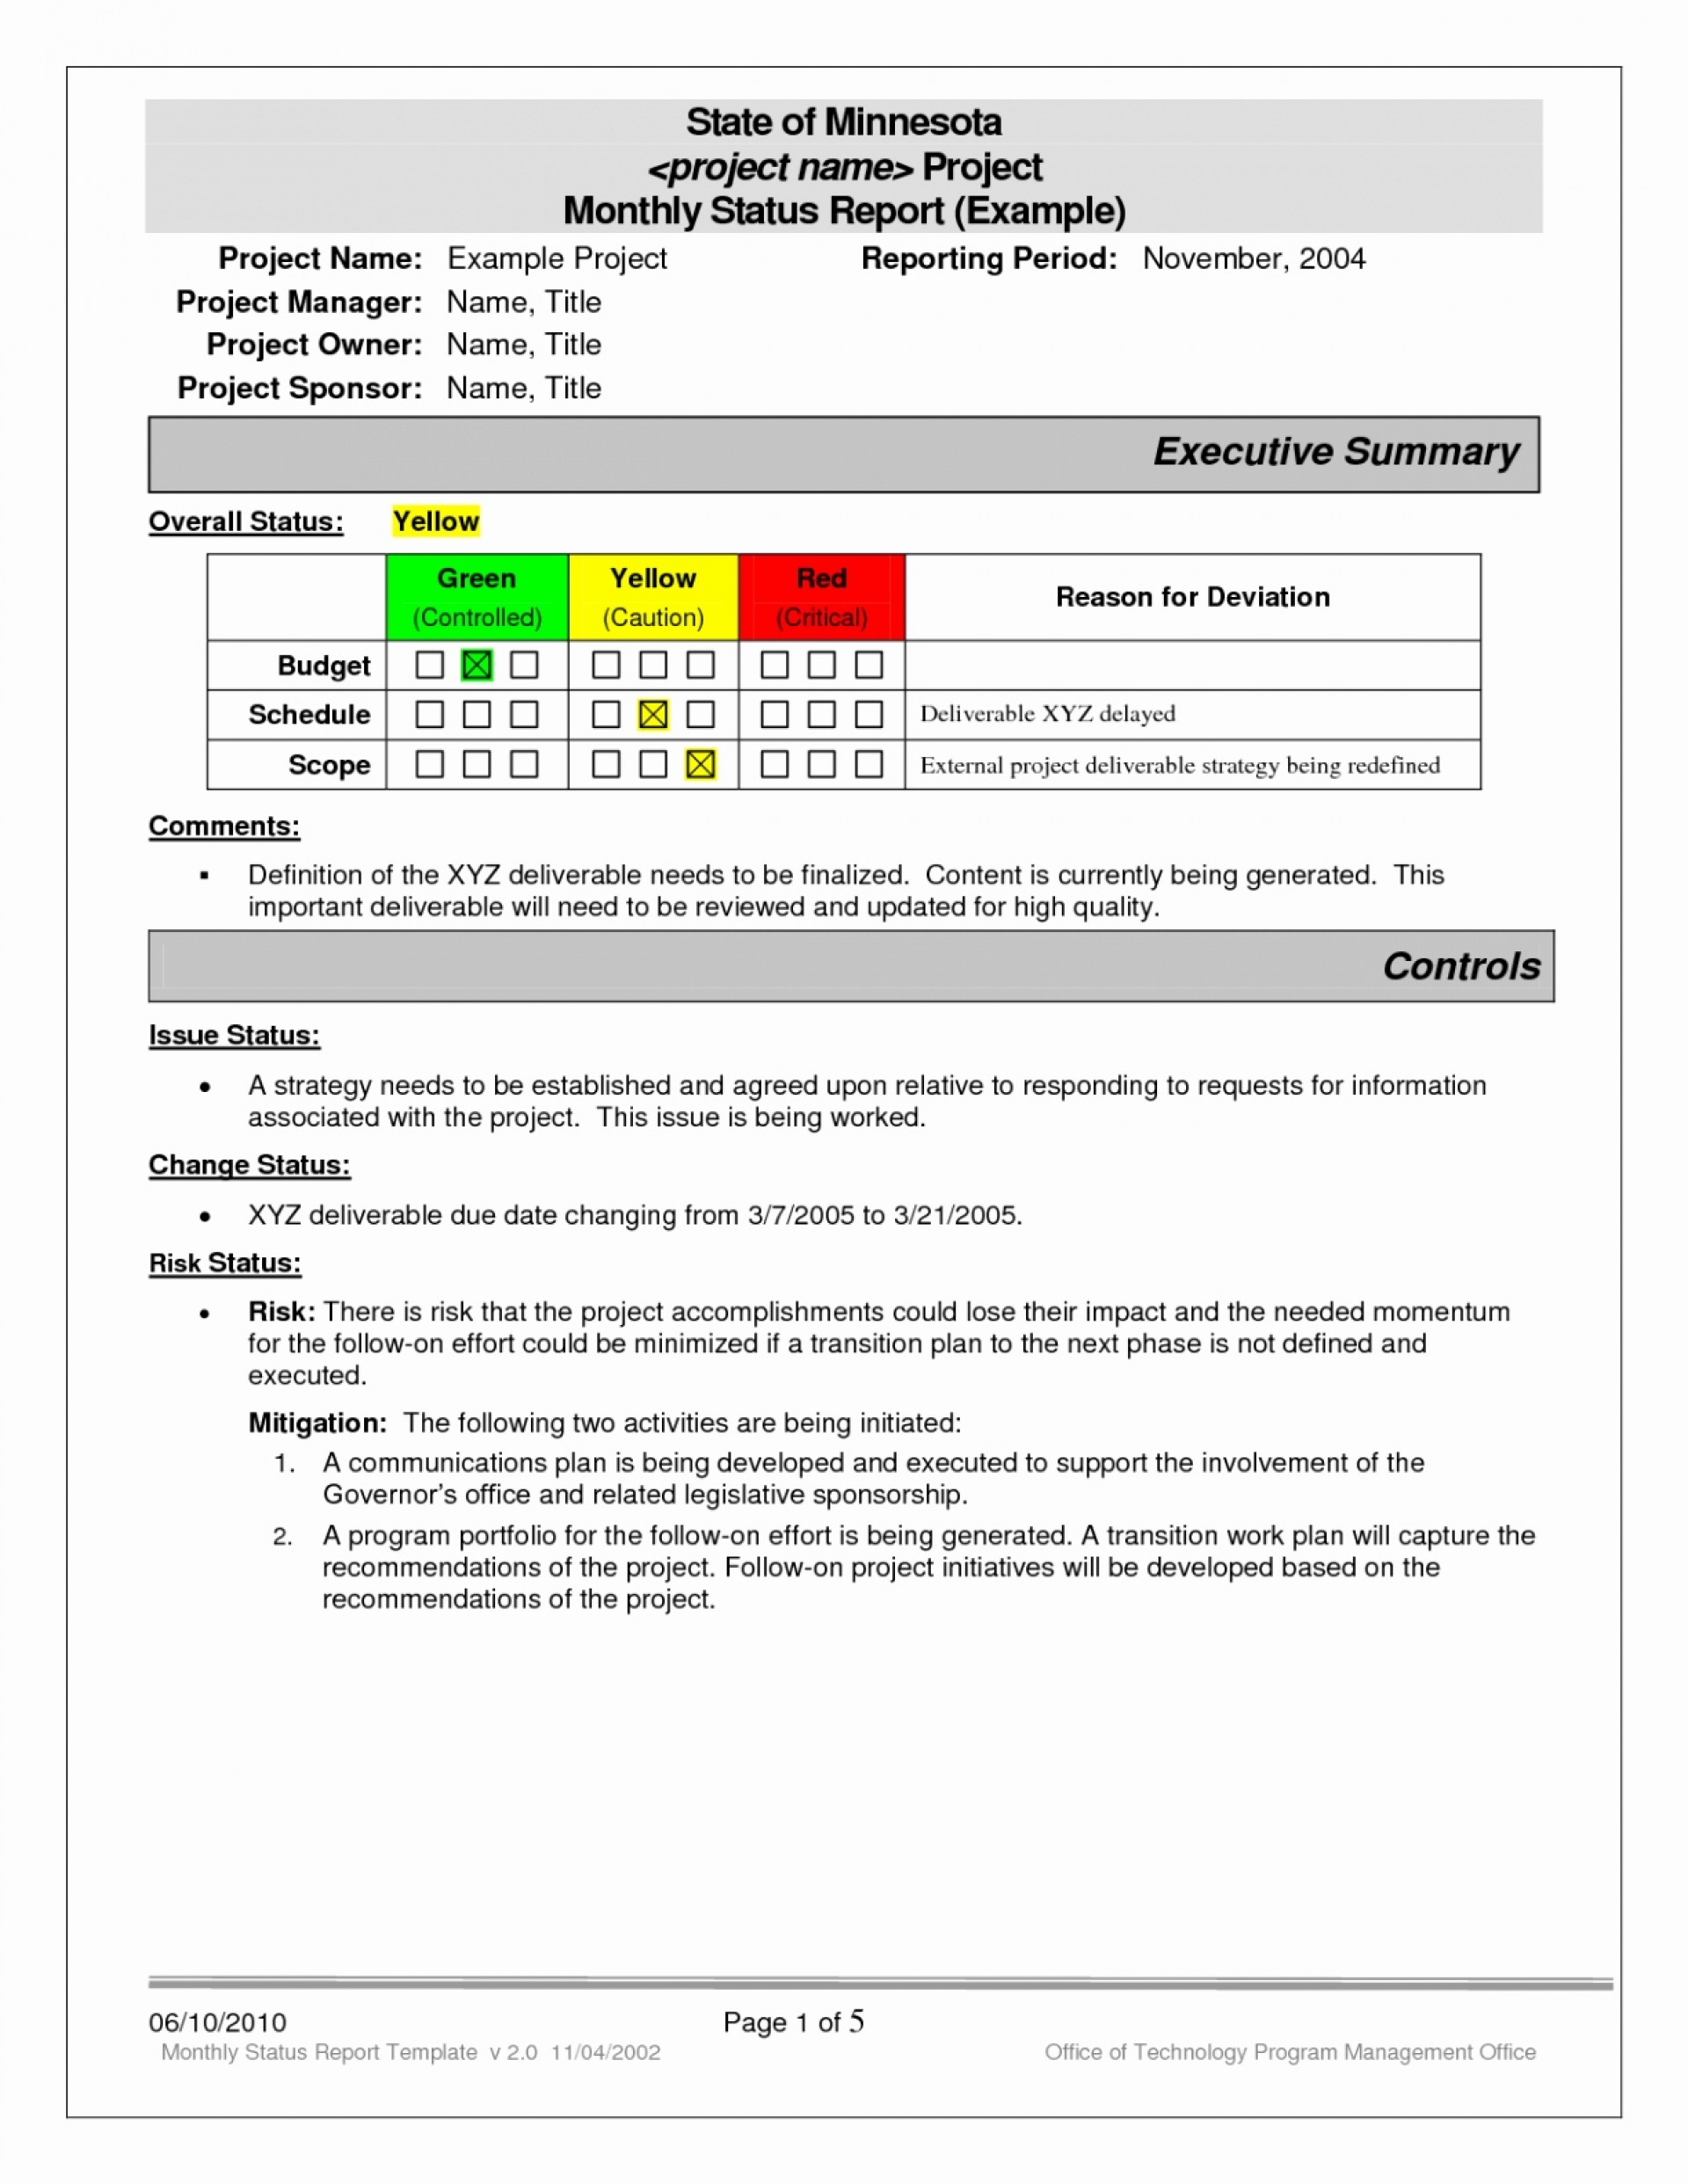 023 Excel Project Status Report Weekly Template 4Vy49Mzf With Software Testing Weekly Status Report Template